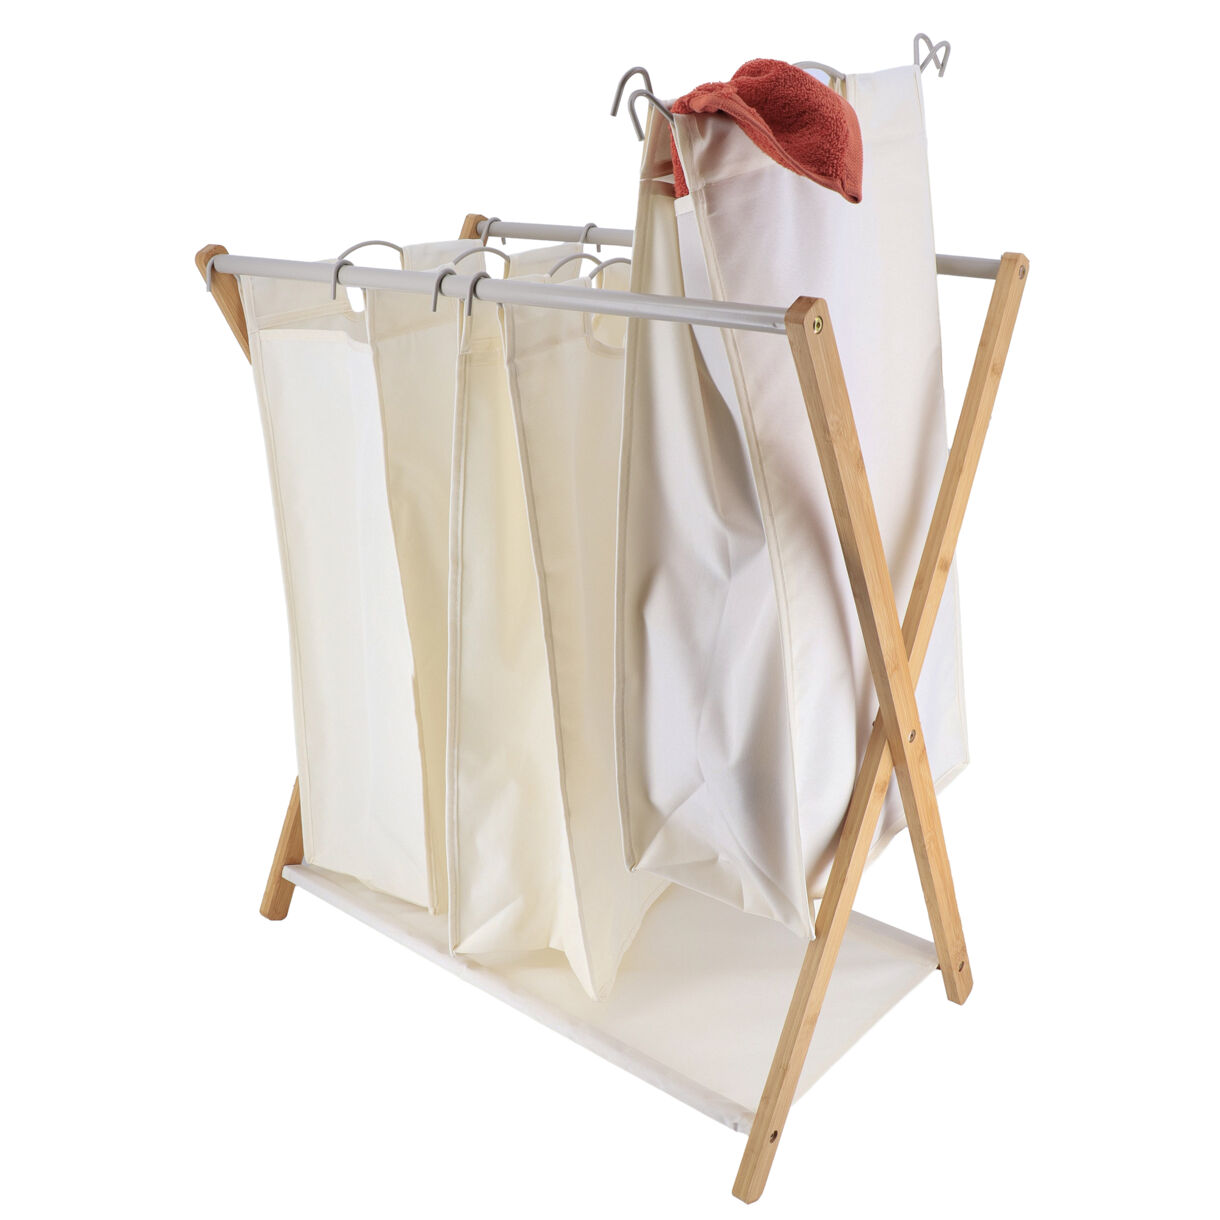 PANIERE A LINGE 3 COMPARTIMENTS POLYESTER STRUCTURE BAMBOU / METAL - NATUREL/BAMBOU